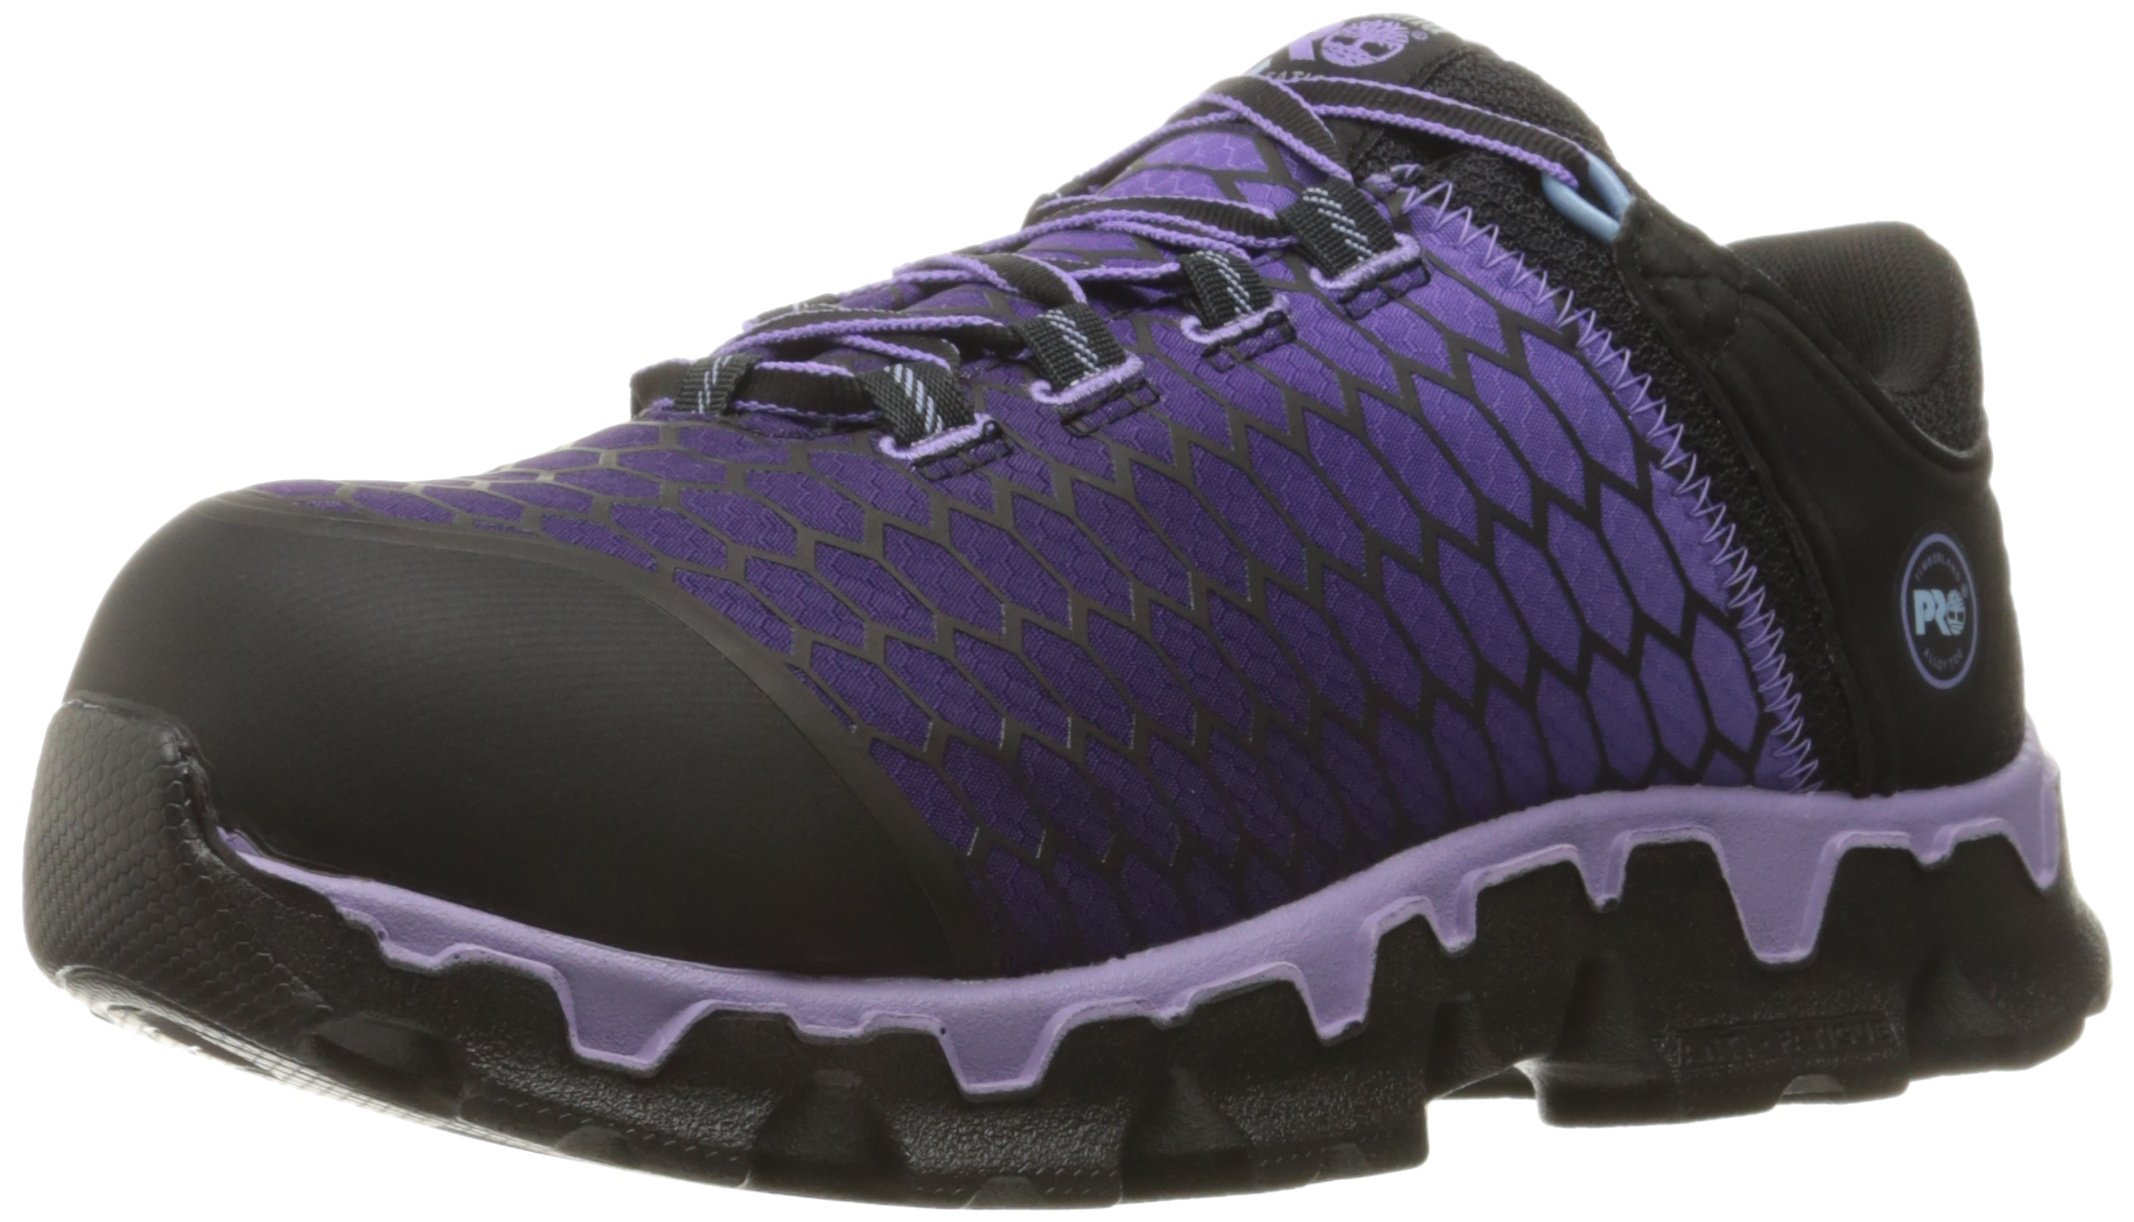 Timberland PRO Women's Powertrain Sport Alloy Toe SD+ Industrial and Construction Shoe